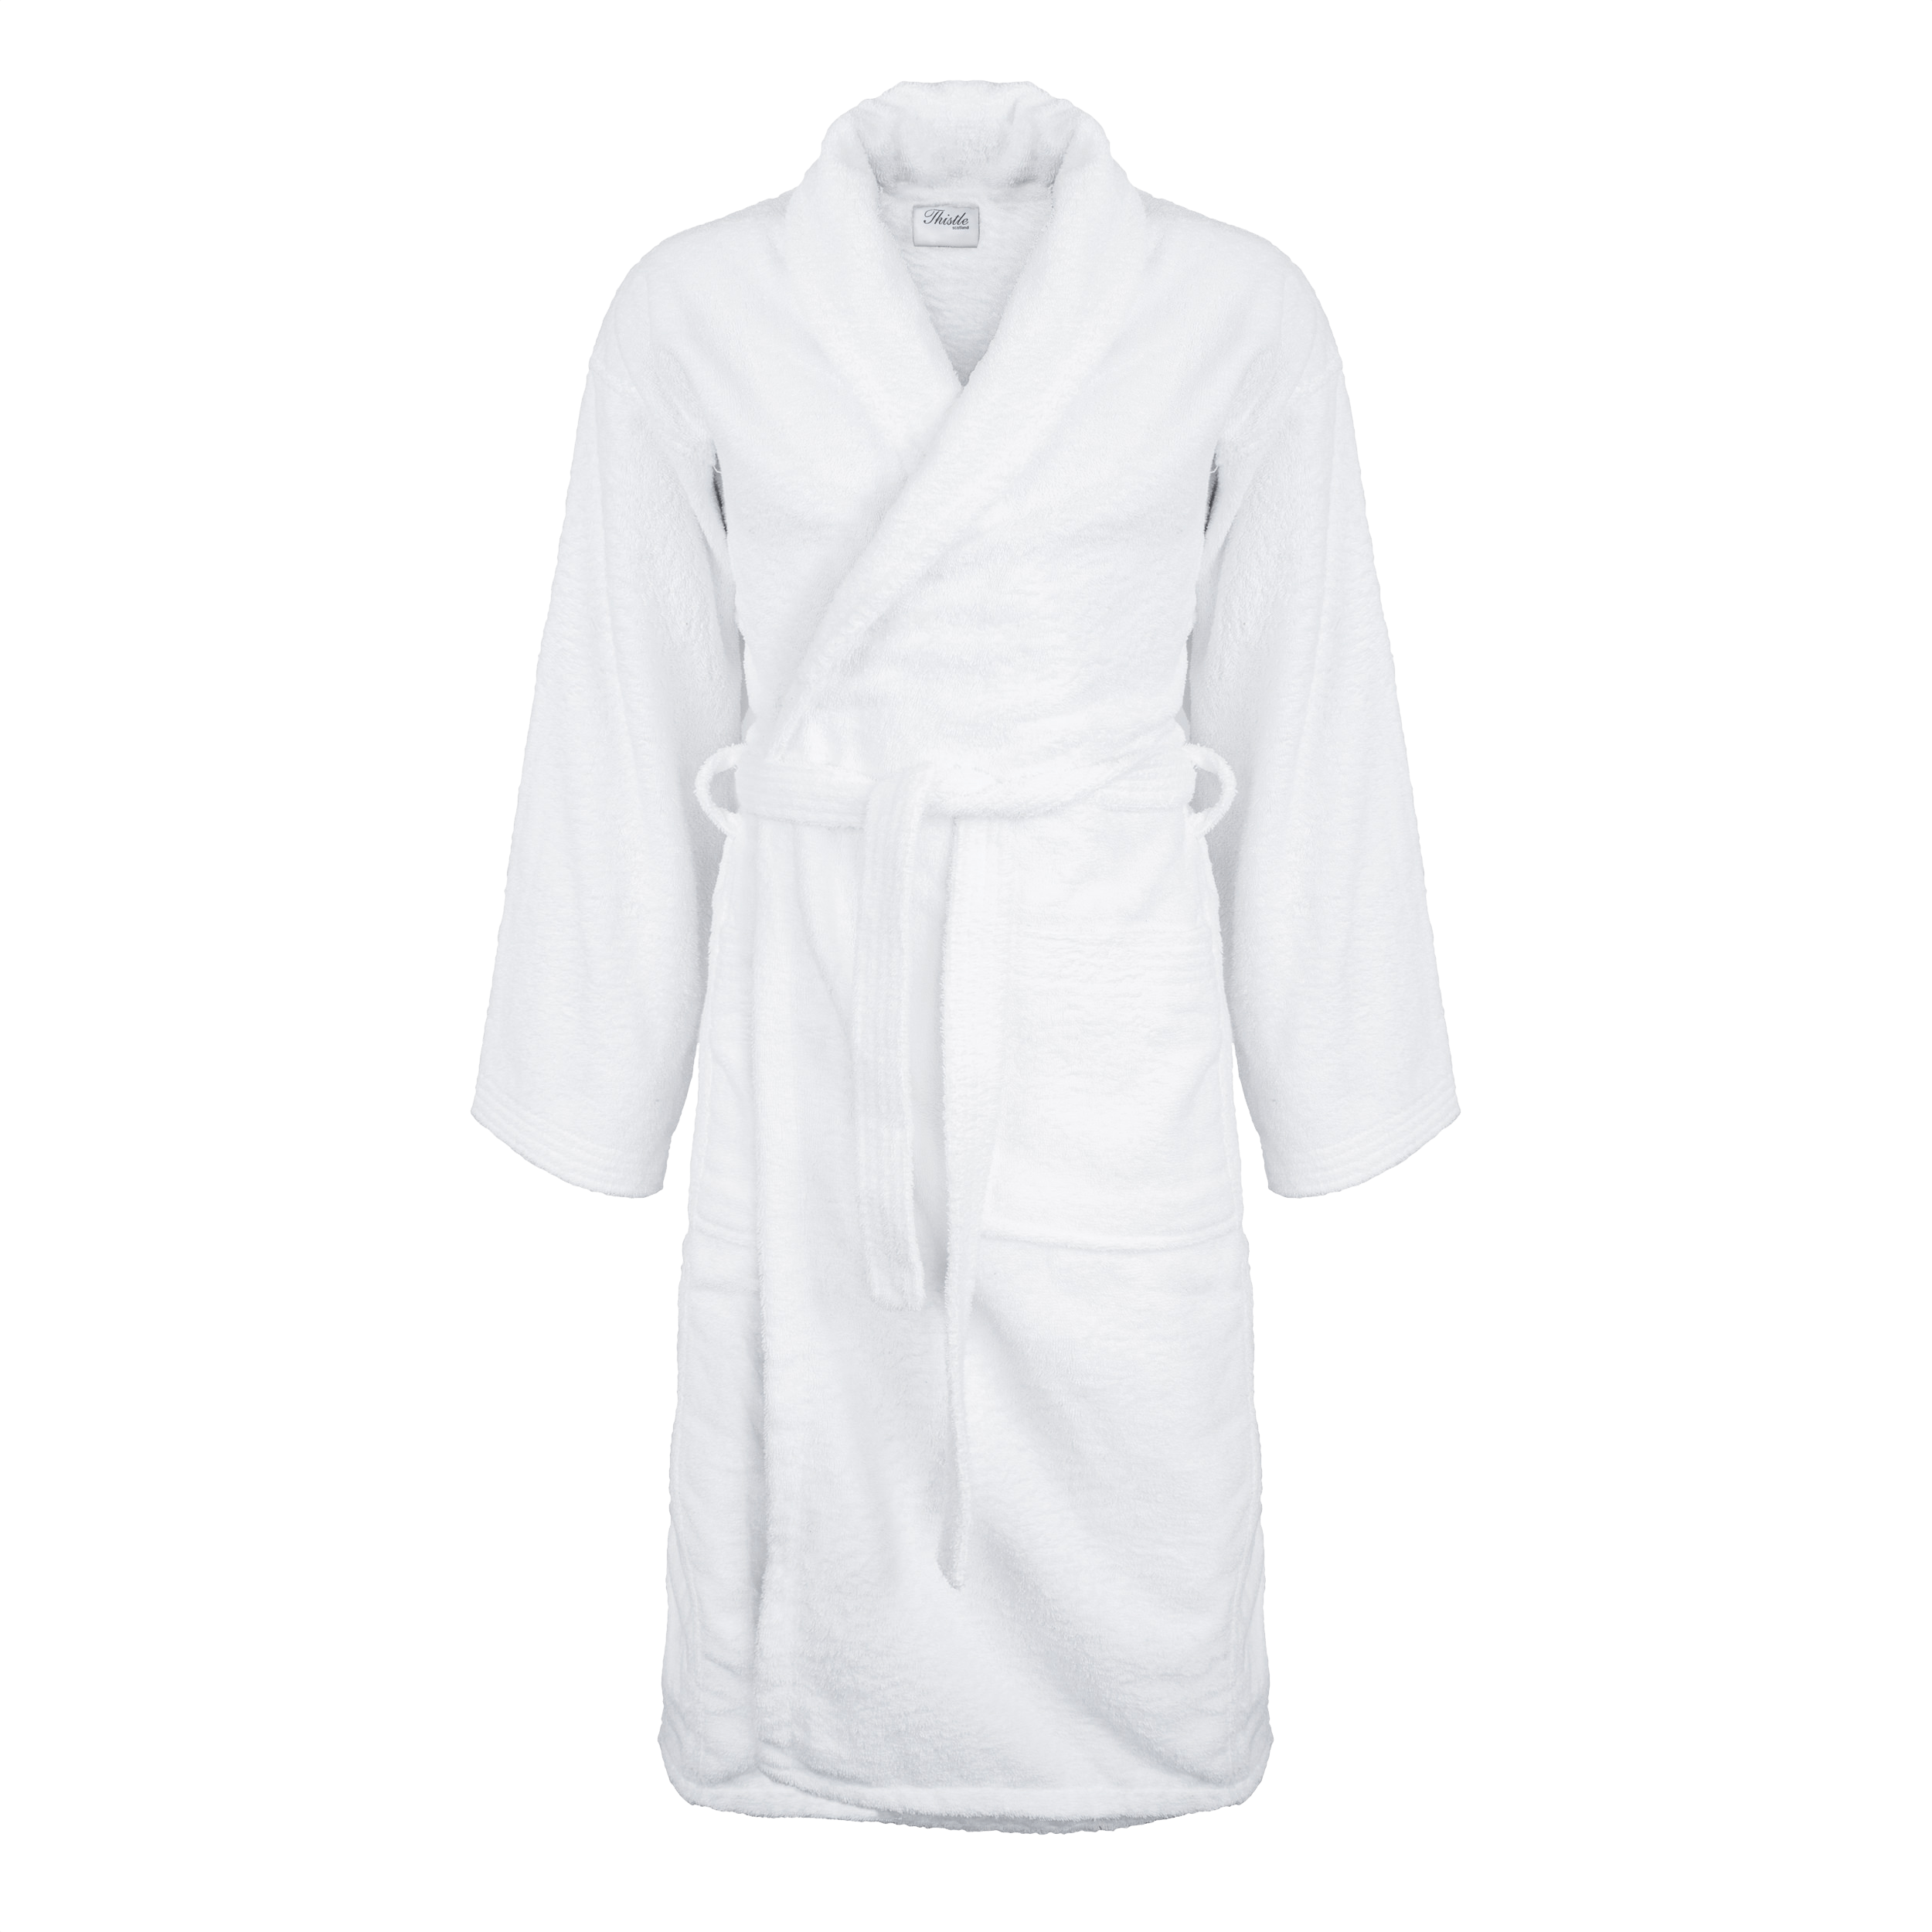 Kuingbhn Men Dressing Gown Men's Towelling Bath Robe Terry Cloth Shawl  Collar Dressing Gown for All Seasons Spa Hotel Sleep Home for Winter (Color  : Brass, Size : M) : Amazon.co.uk: Fashion